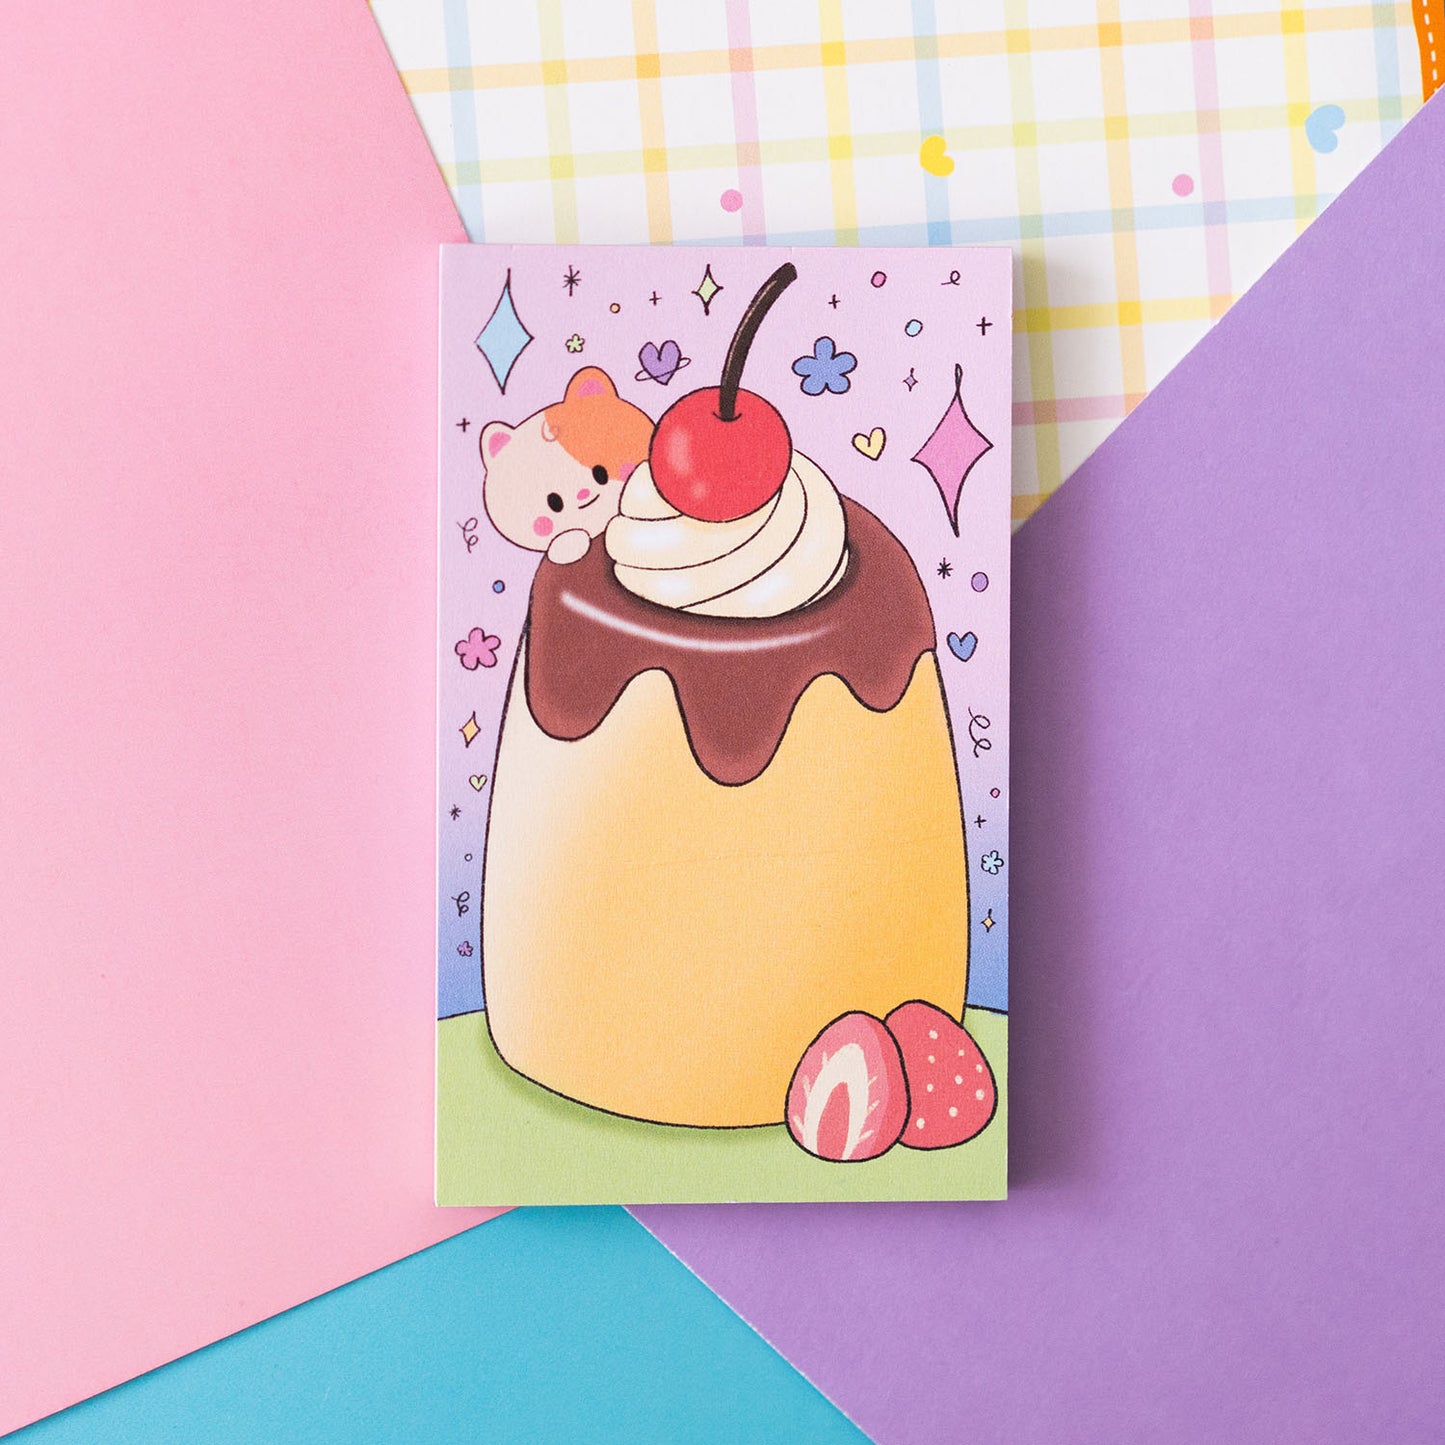 Pudding and Cream Soda Memo Pad by mintymentaiko